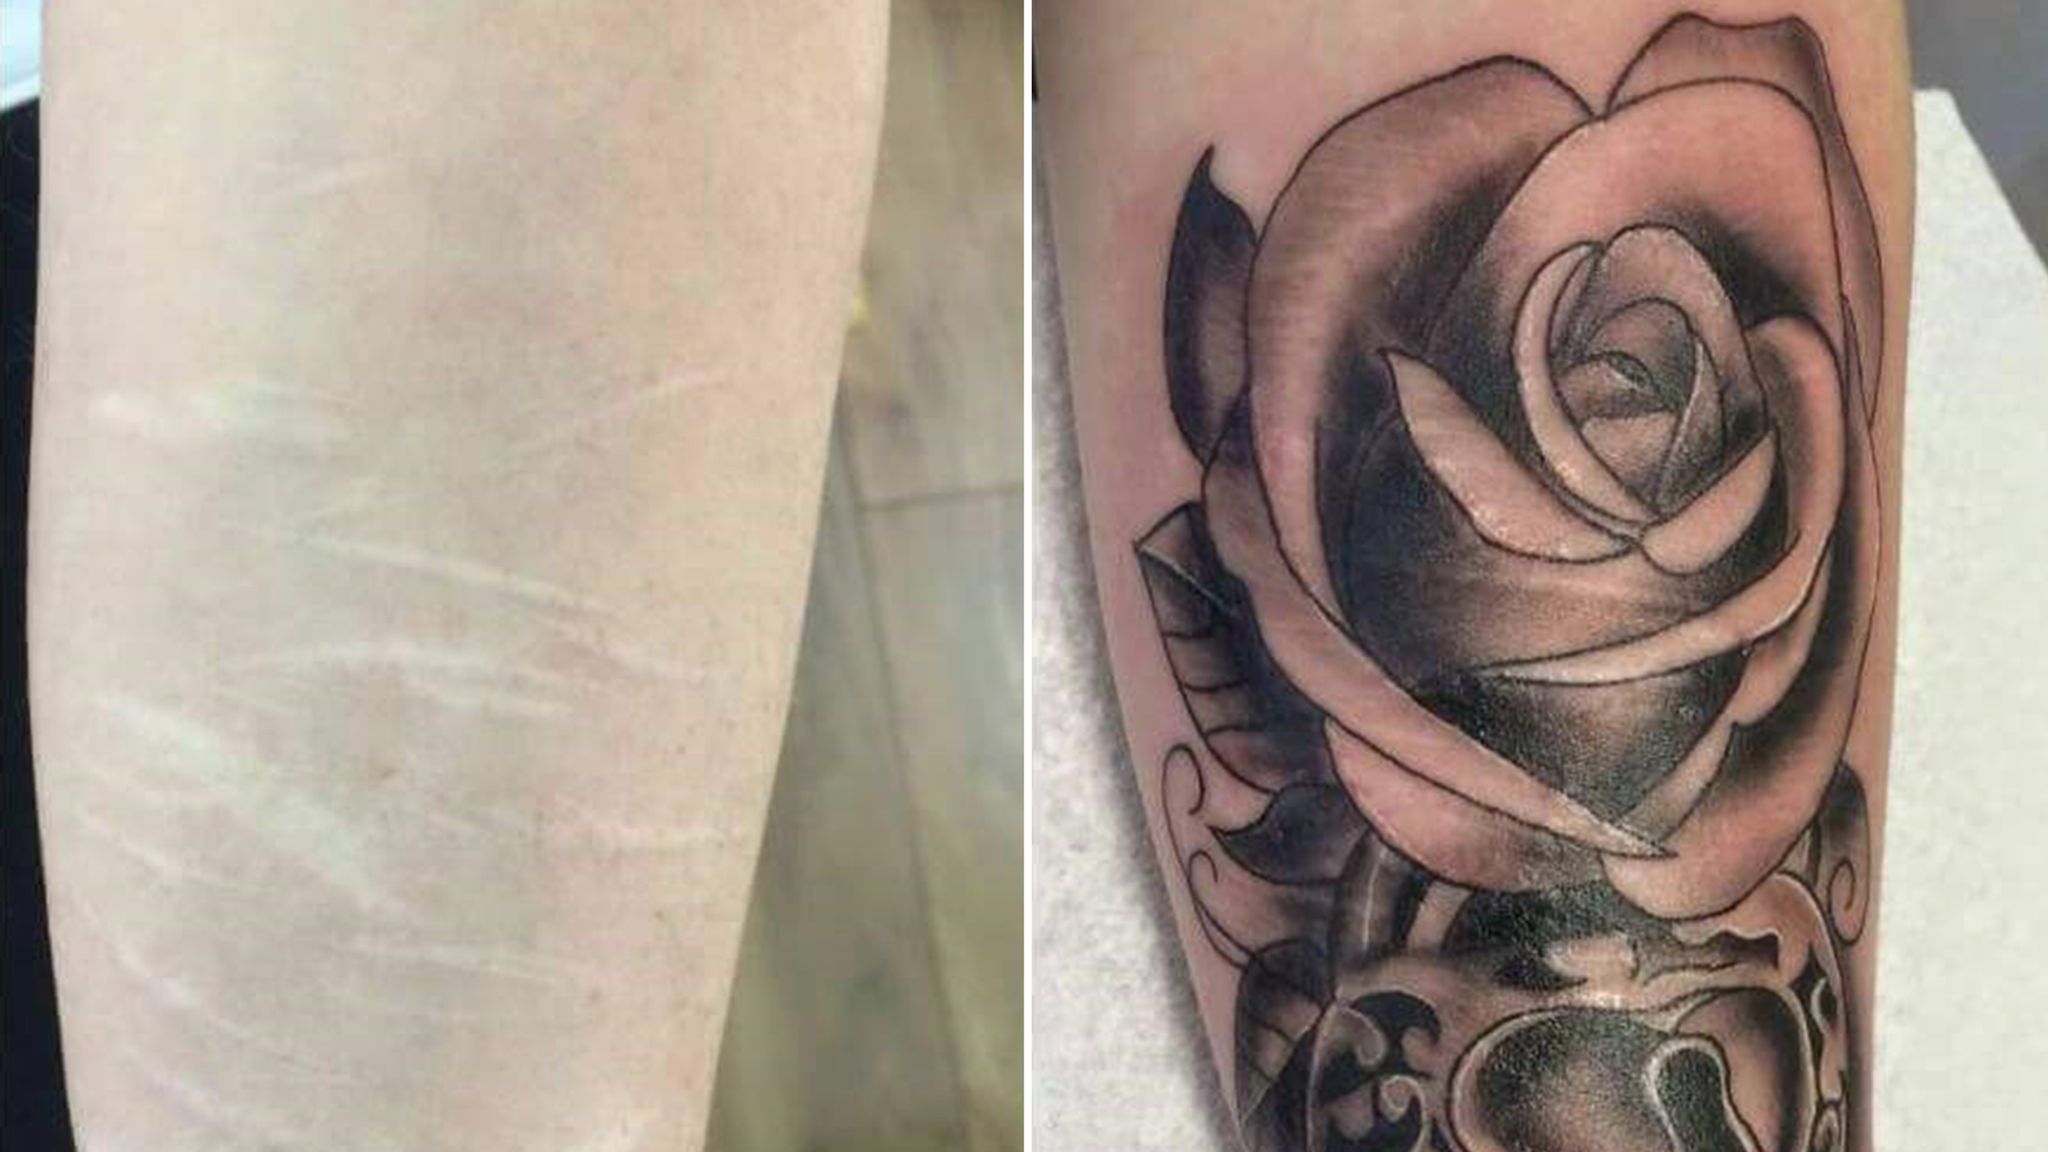 I was considering covering self harm scars with a tattoo, does this work  and does further self harm cause gaps in the ink? - Quora